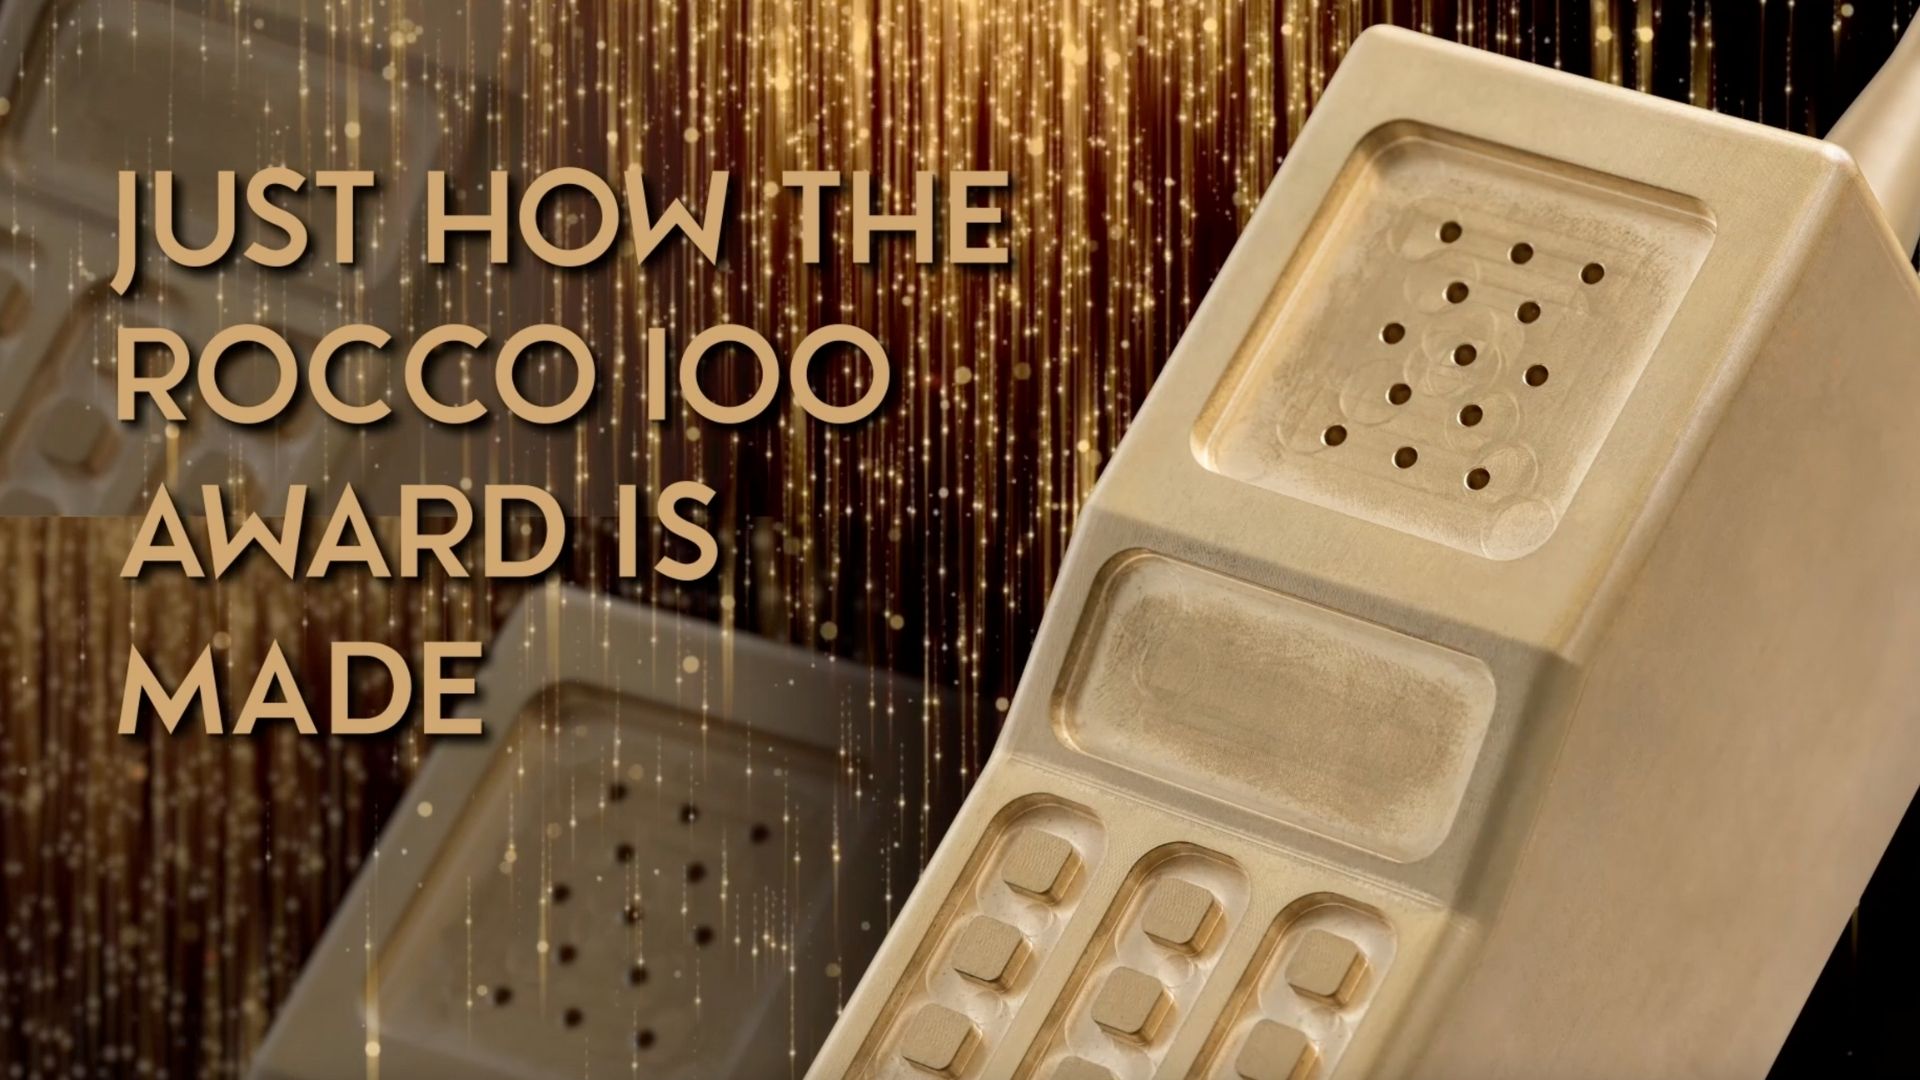 How the ROCCO IOO awards are made